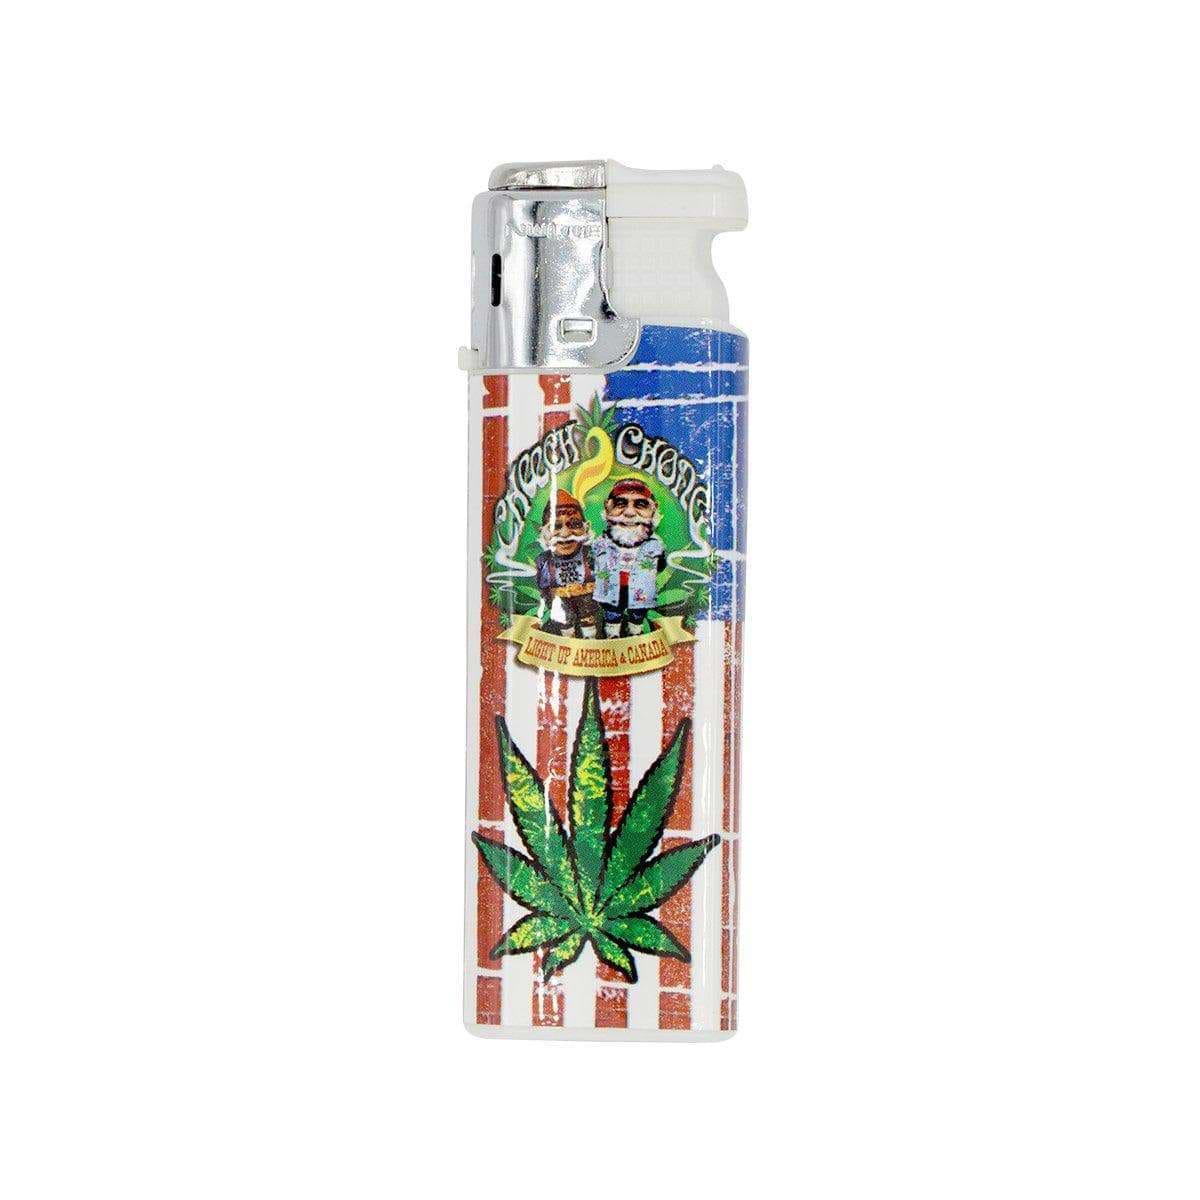 2 packs lighter torch smoking accessory with Cheech n Chong on USA flag and weed leaf design classic lighter shape